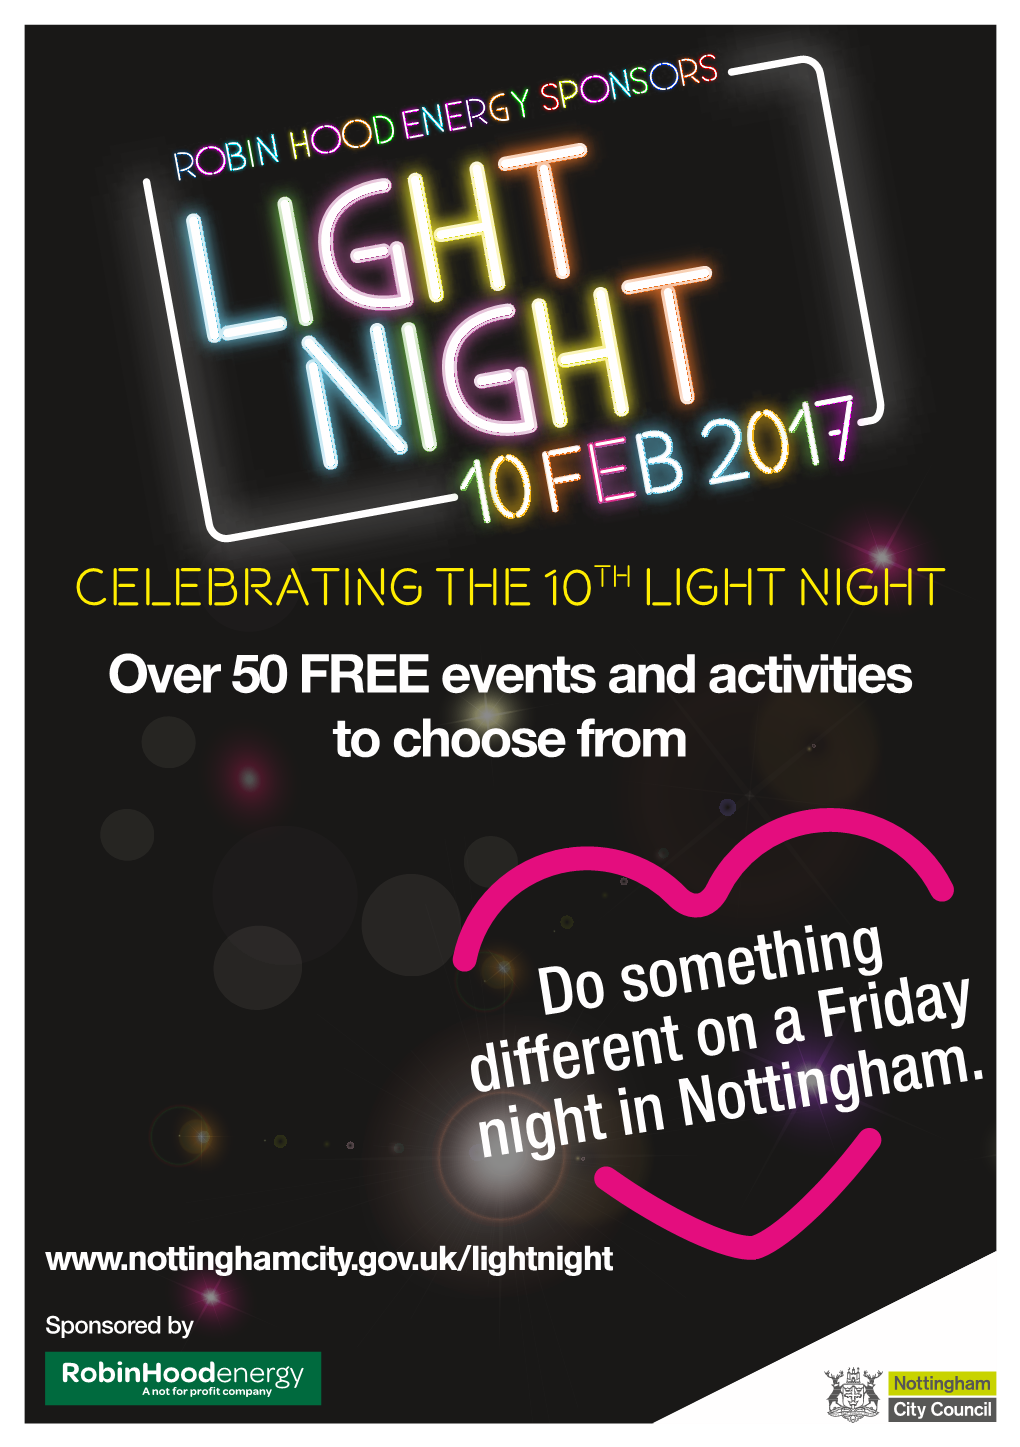 Do Something Different on a Friday Night in Nottingham